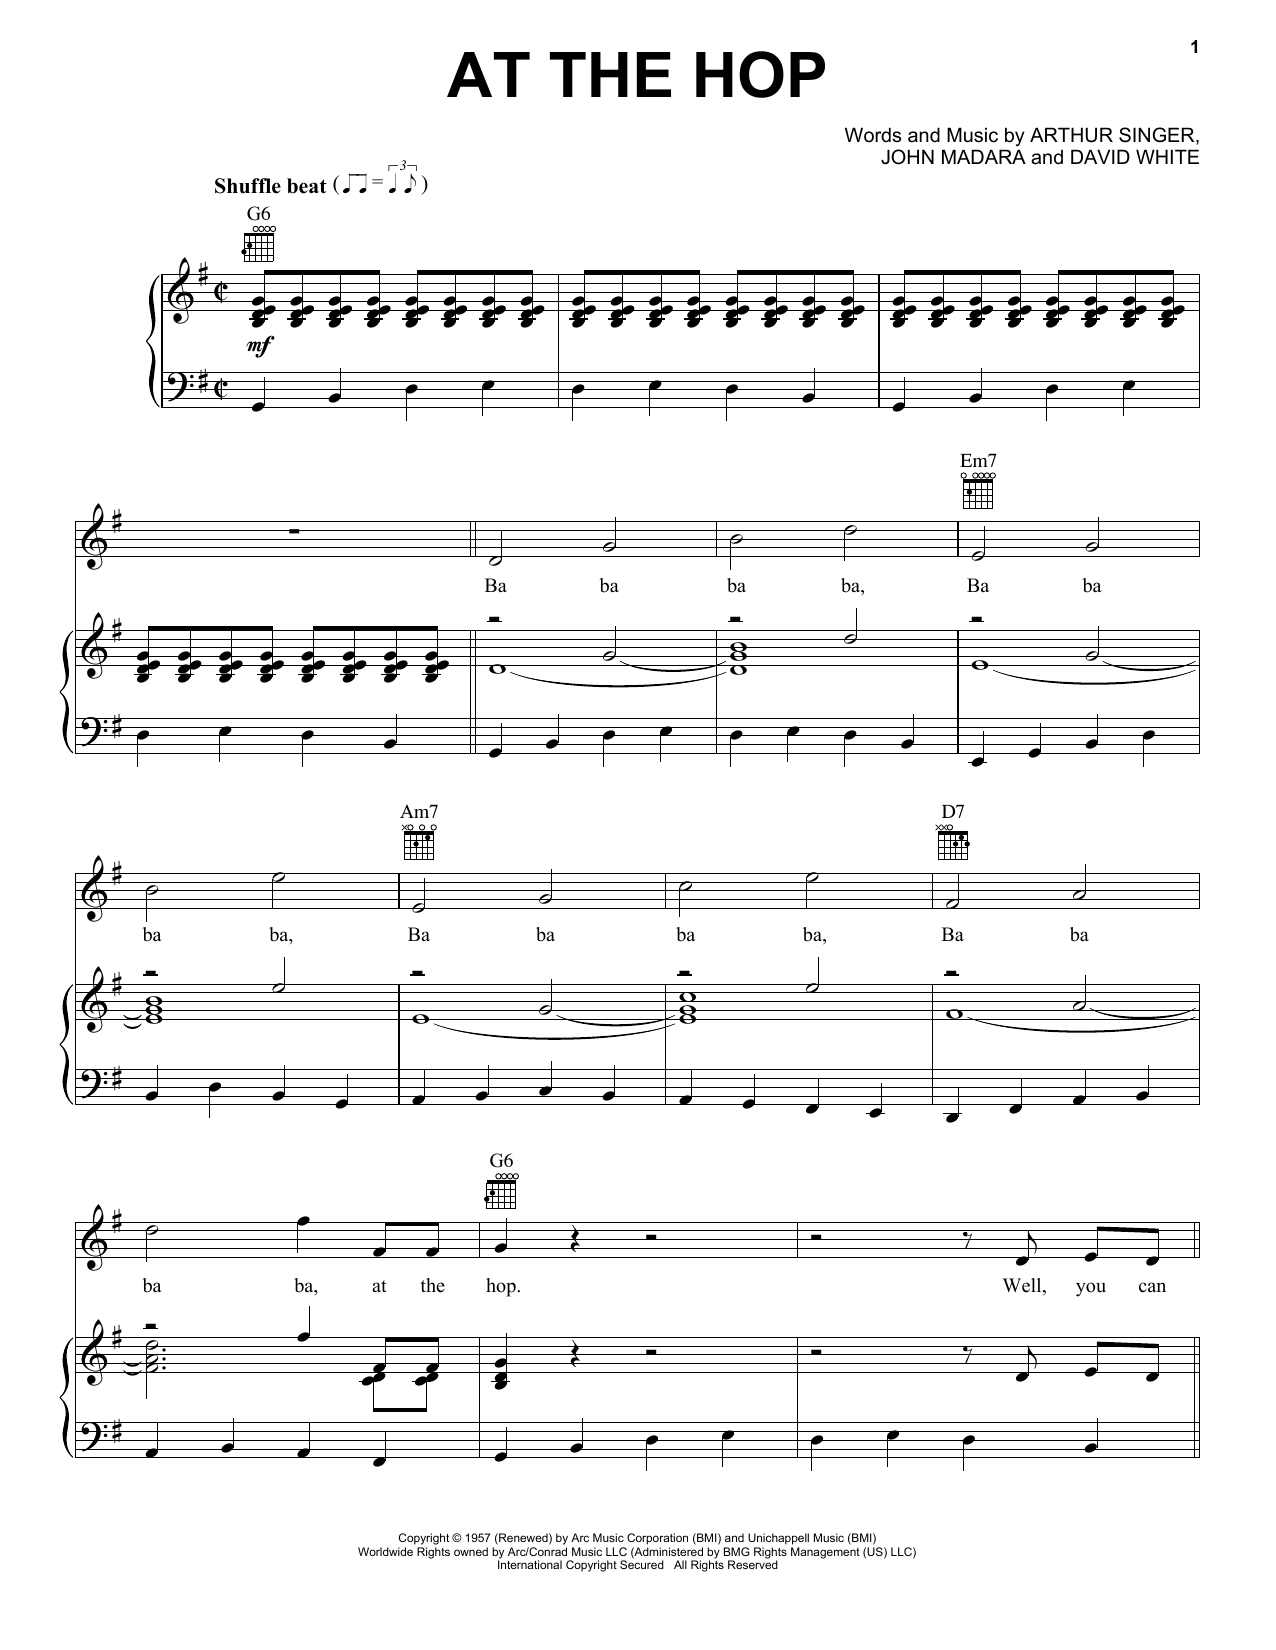 Danny & The Juniors At The Hop sheet music notes printable PDF score